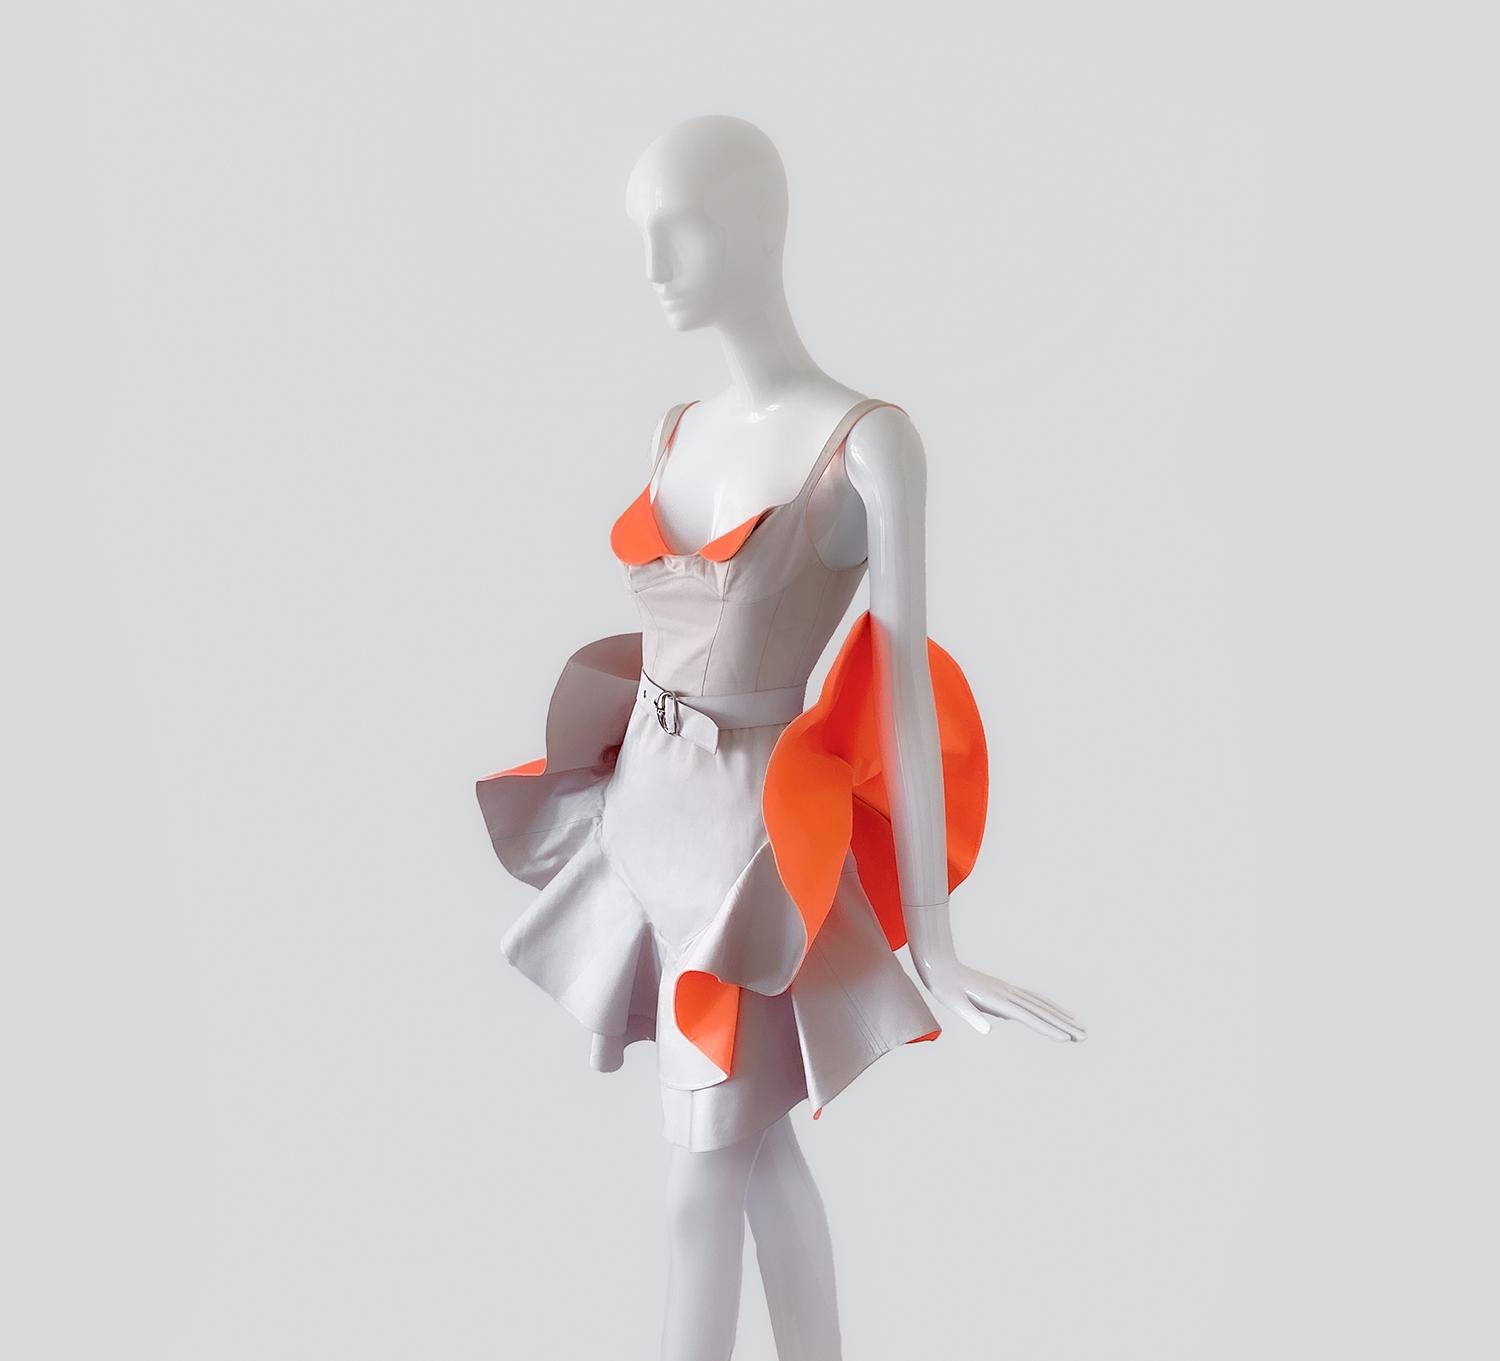 
Museum worthy collectors piece.
The extremey rare Thierry Mugler Flower Petal dress, light grey and neon orange colours. An iconic example of the famous designer legend's signature style: Camp, Statement, Sculpture and Uniqueness.
This gorgeous